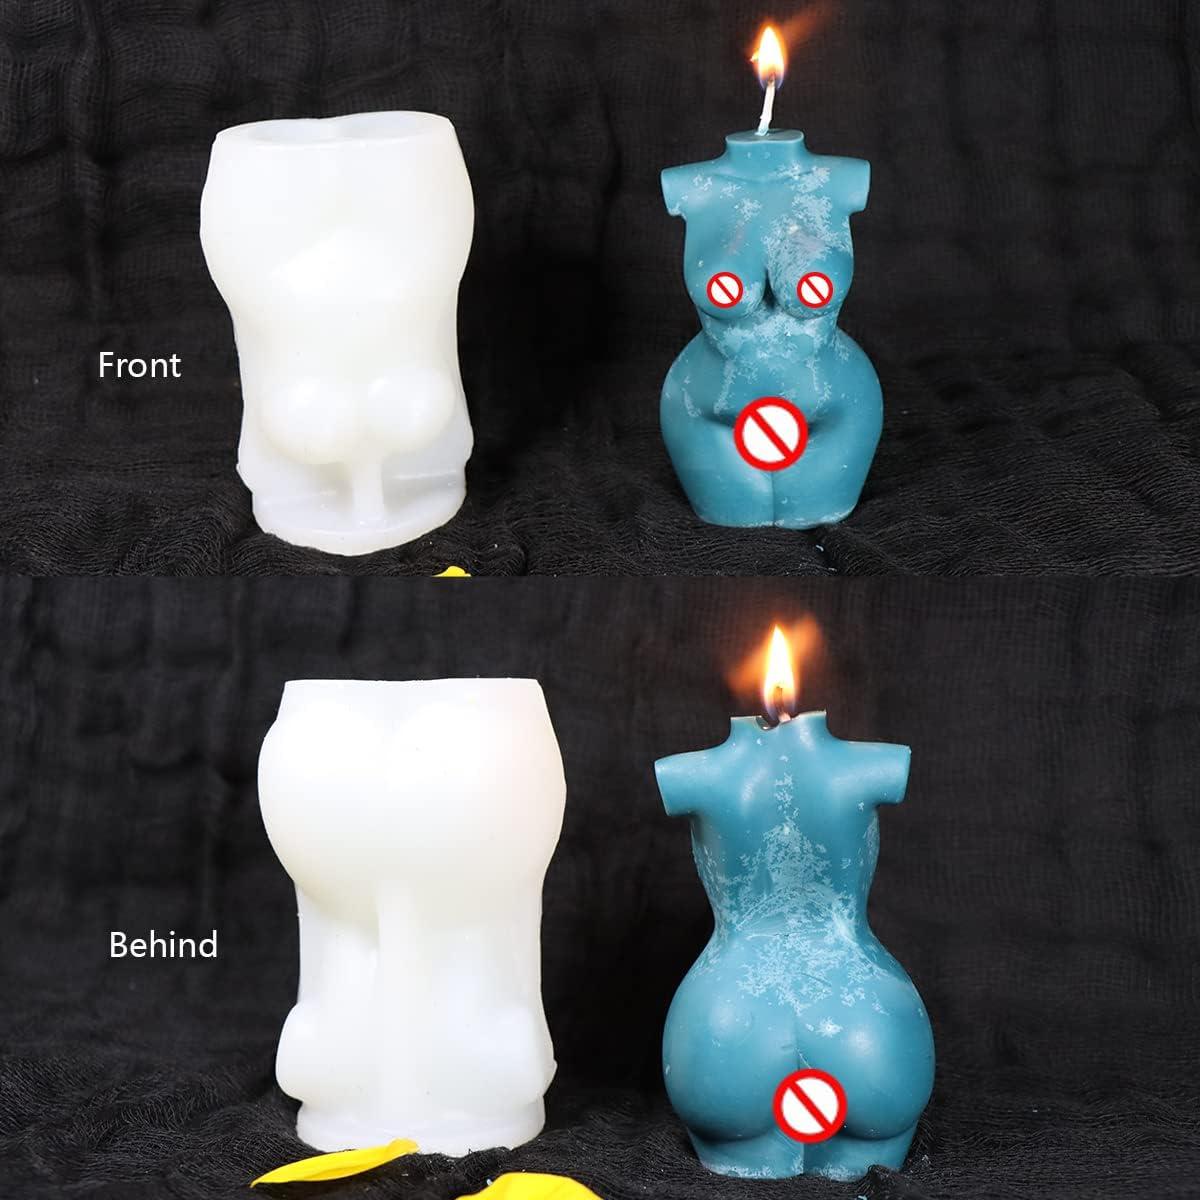 3D Moulds Women Body Candle Making Mold Sex Woman Silicone Body Molds Thick  Female Body Curvy Figure